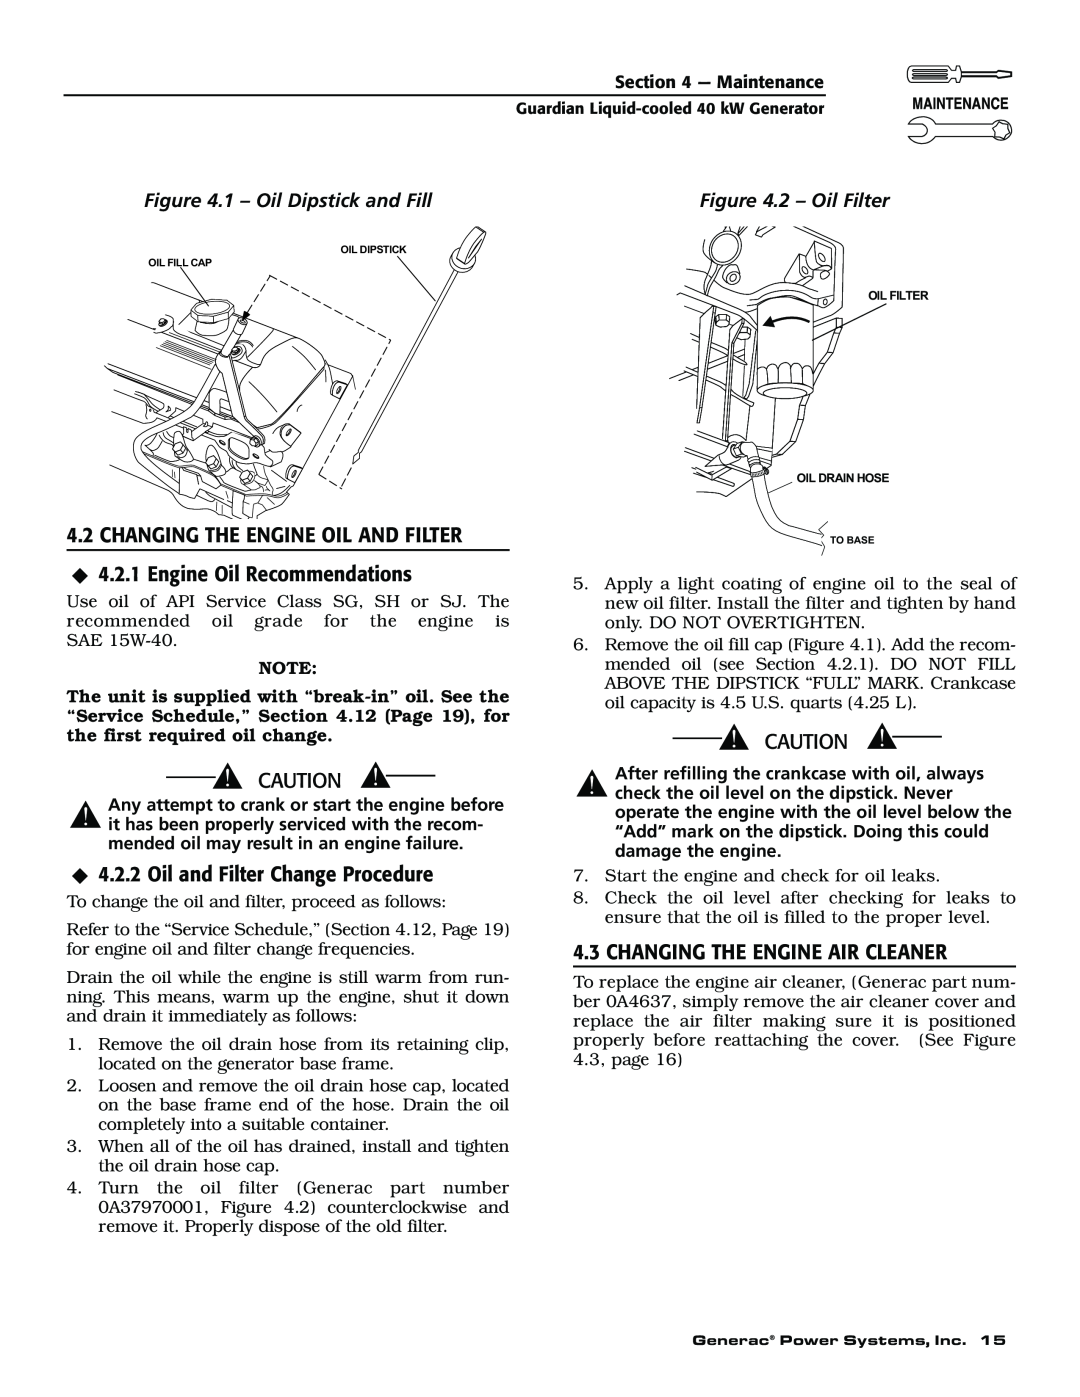 Generac 004626-1, 004373-2 Changing The Engine Oil And Filter, Engine Oil Recommendations, Oil and Filter Change Procedure 